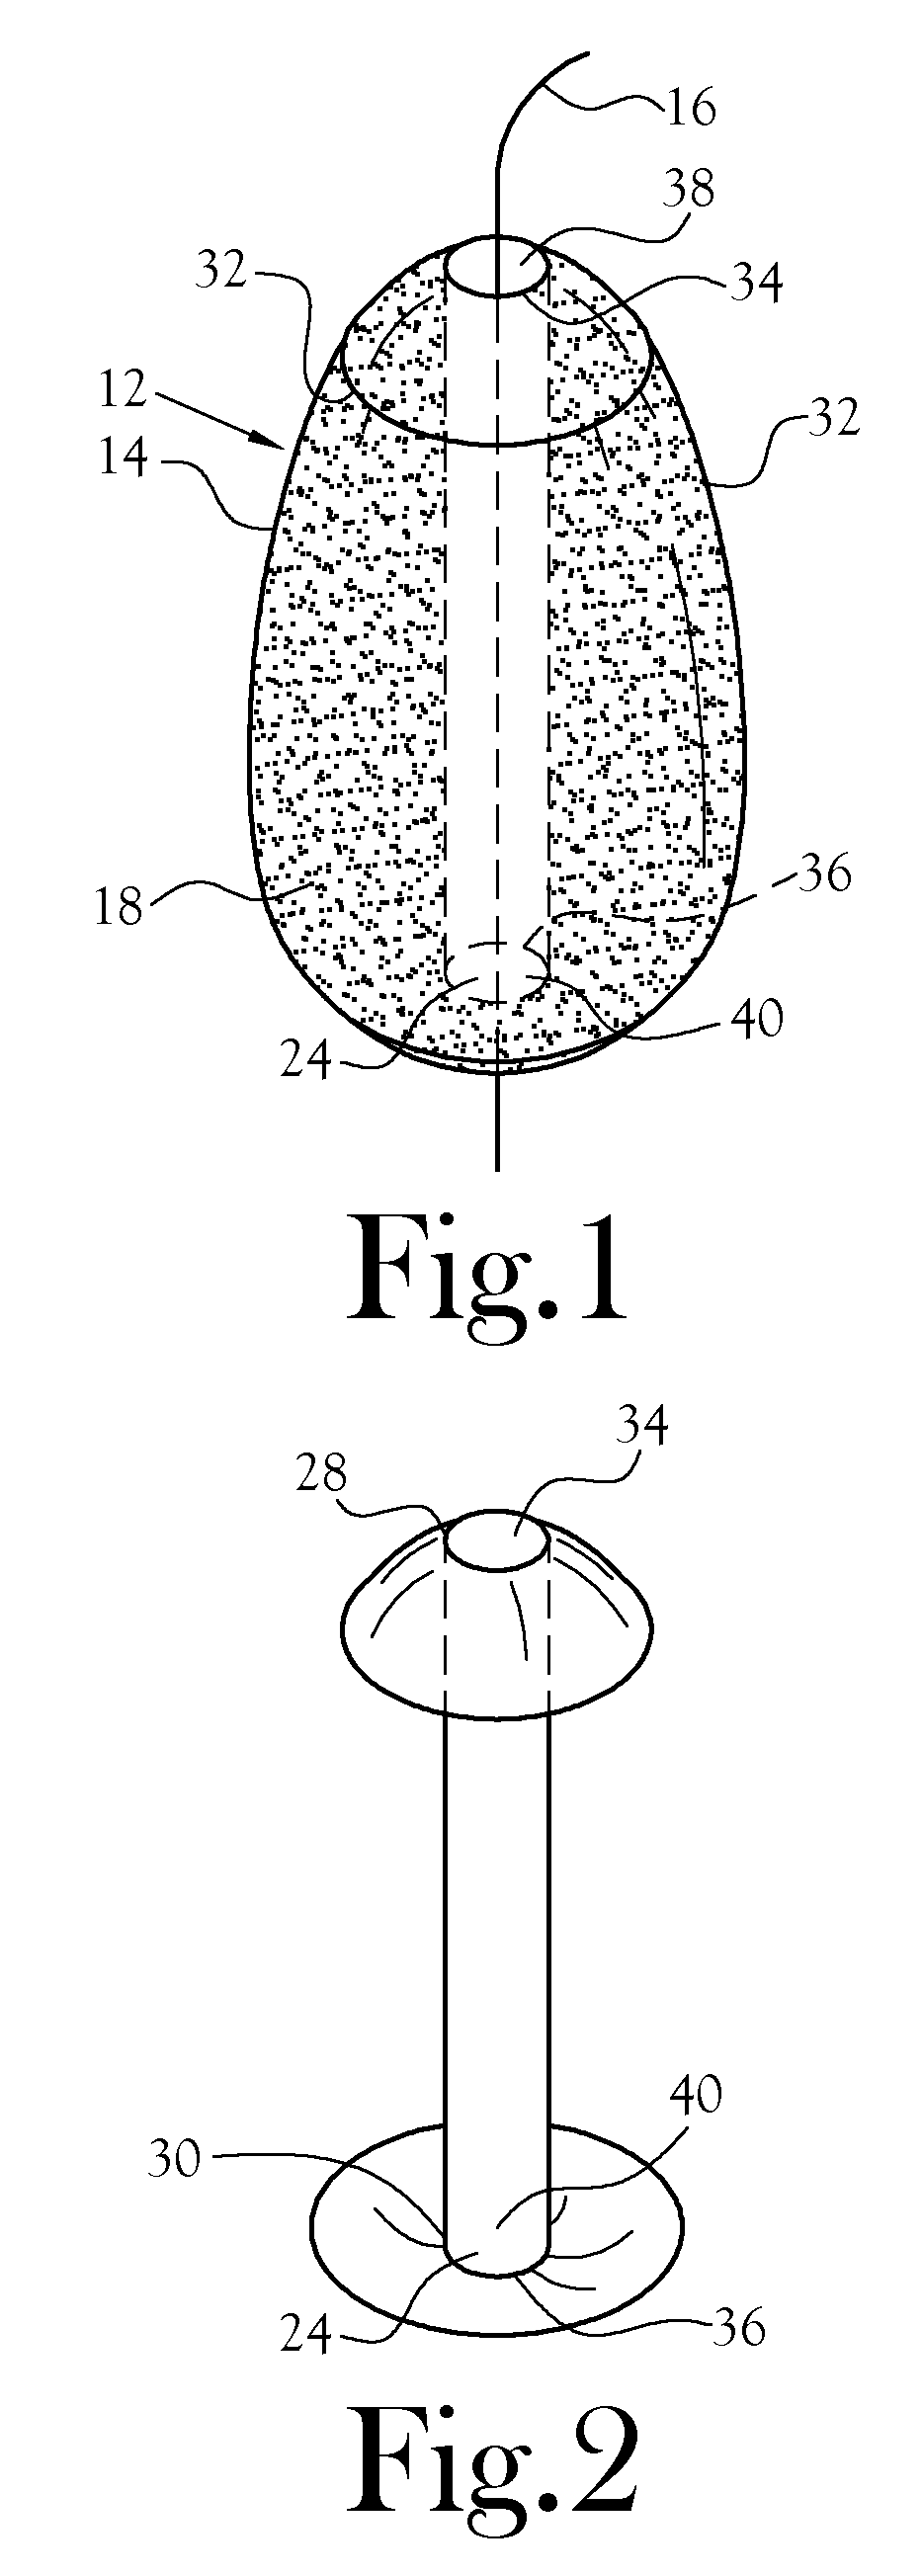 Article of Fishing Tackle and Method of Making Same